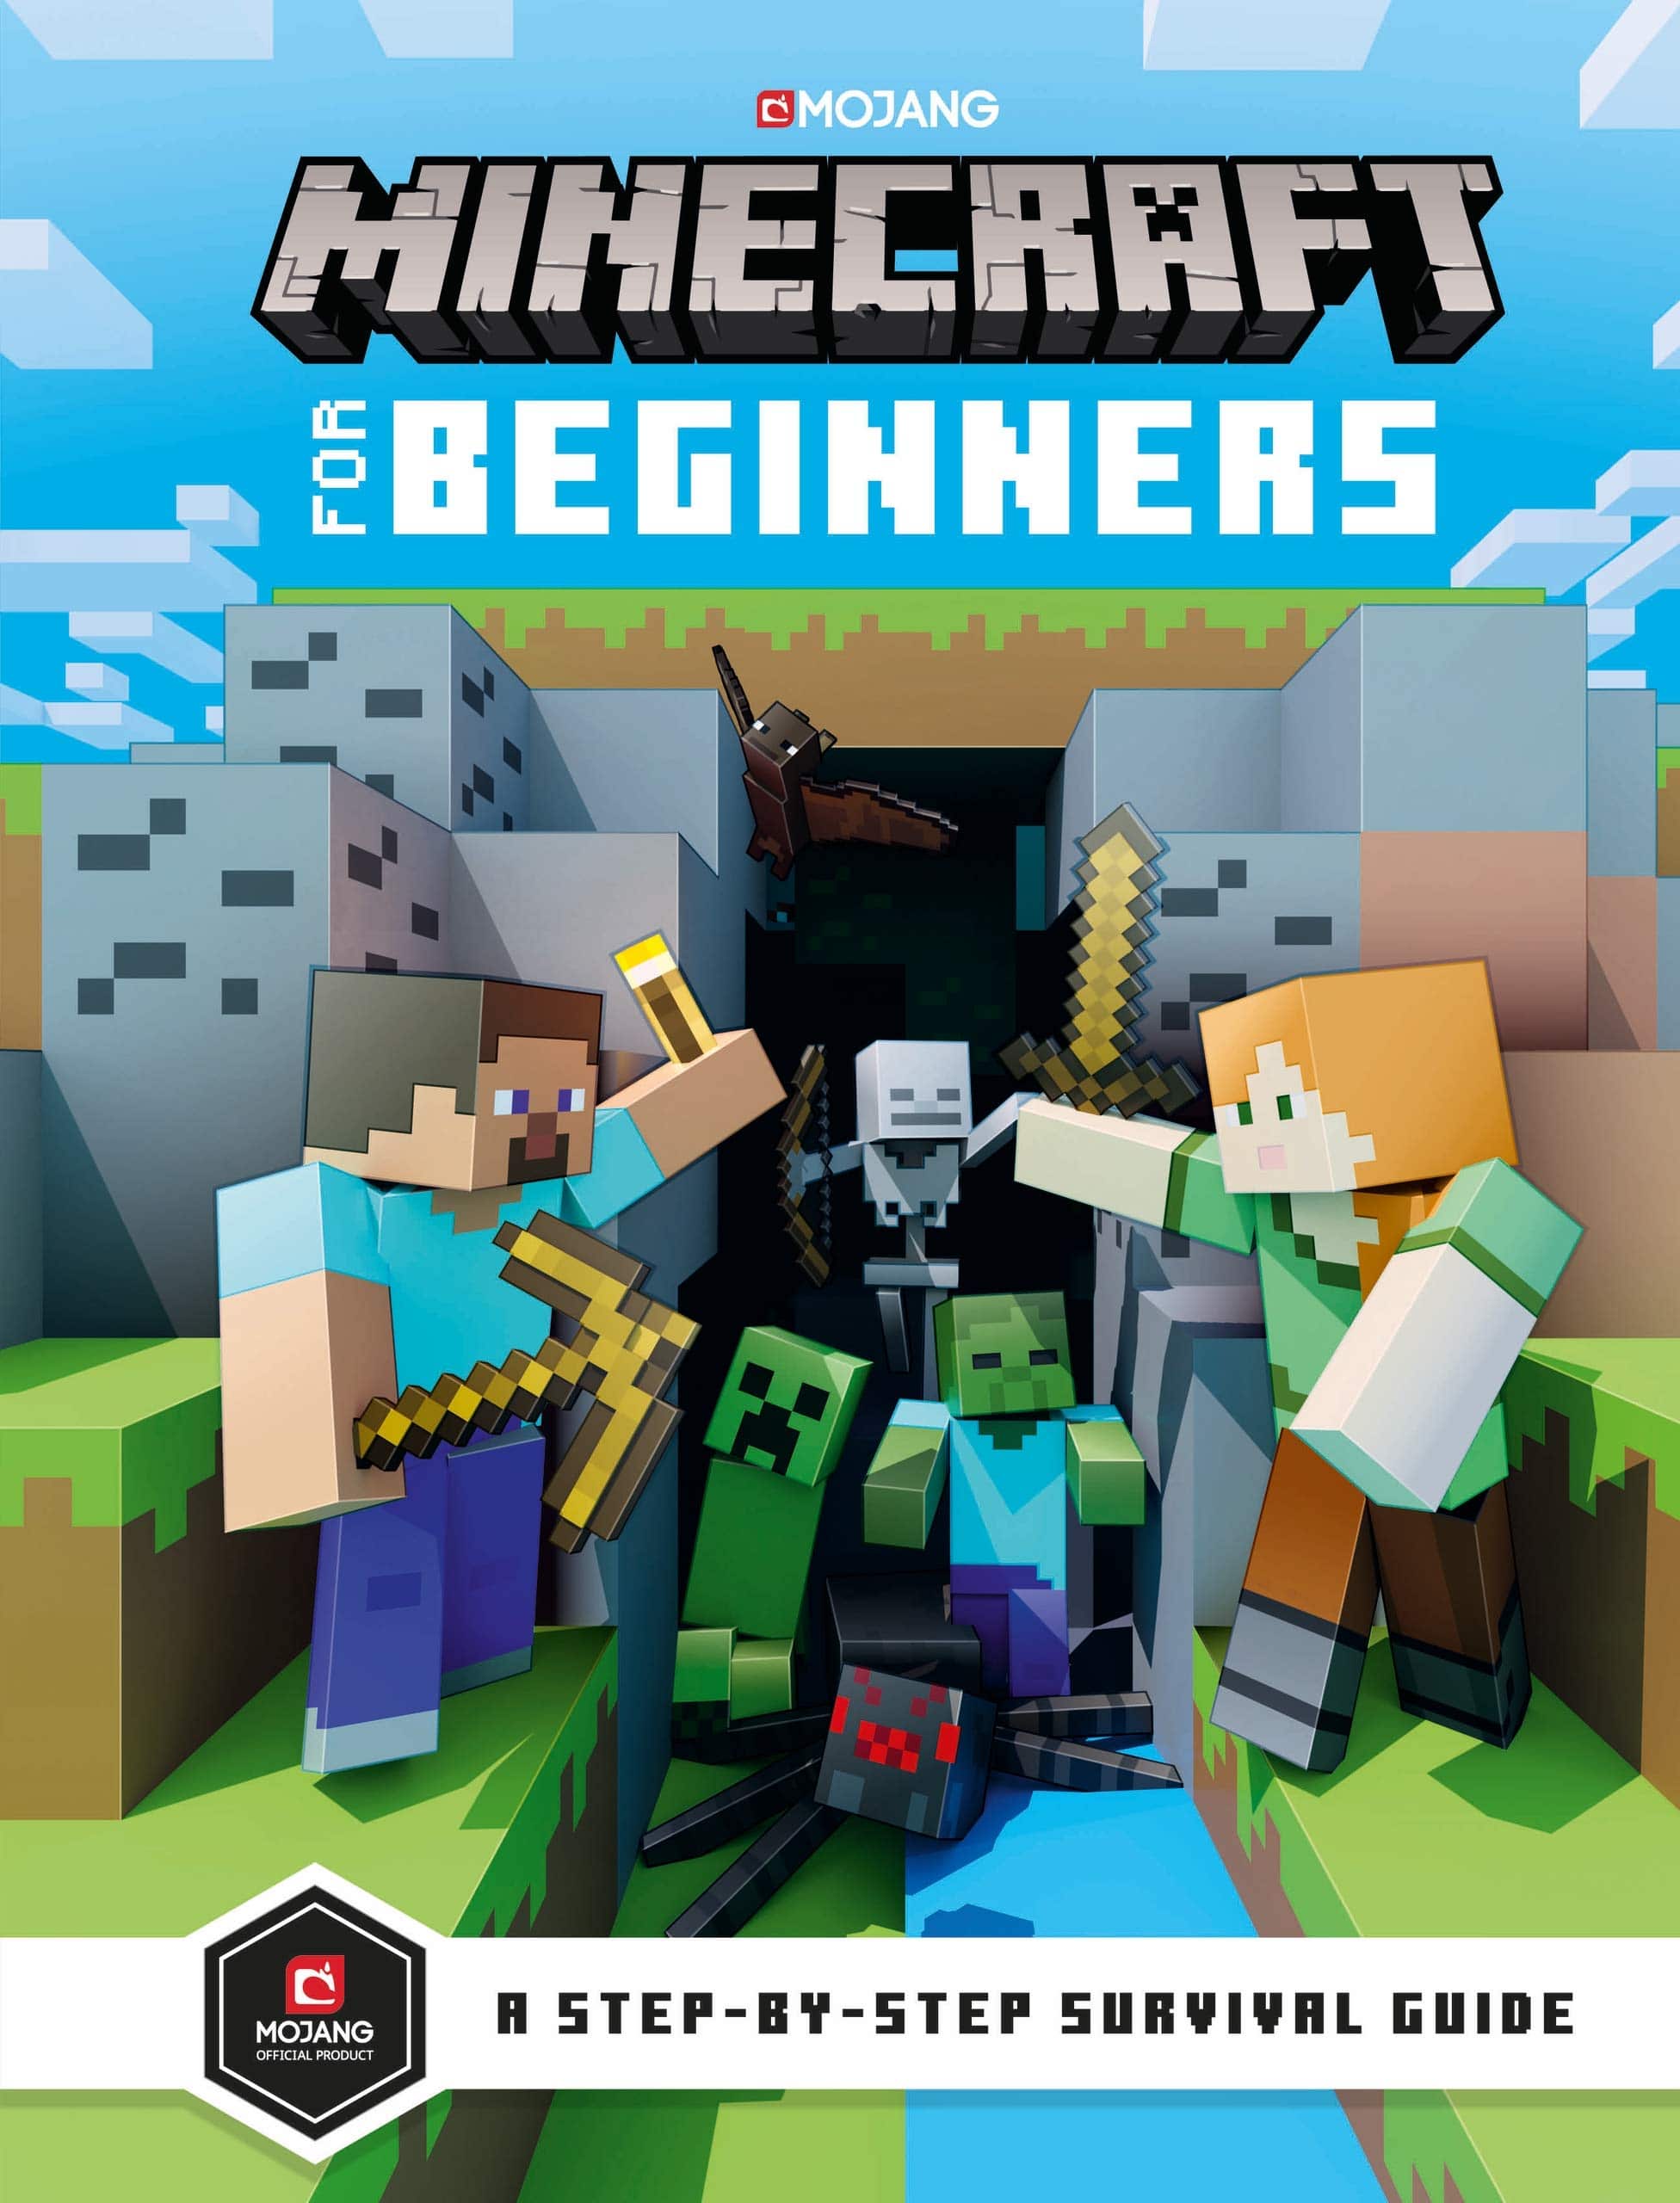 Beginner Tutorial - Minecraft for PC, PS4 and XBOne